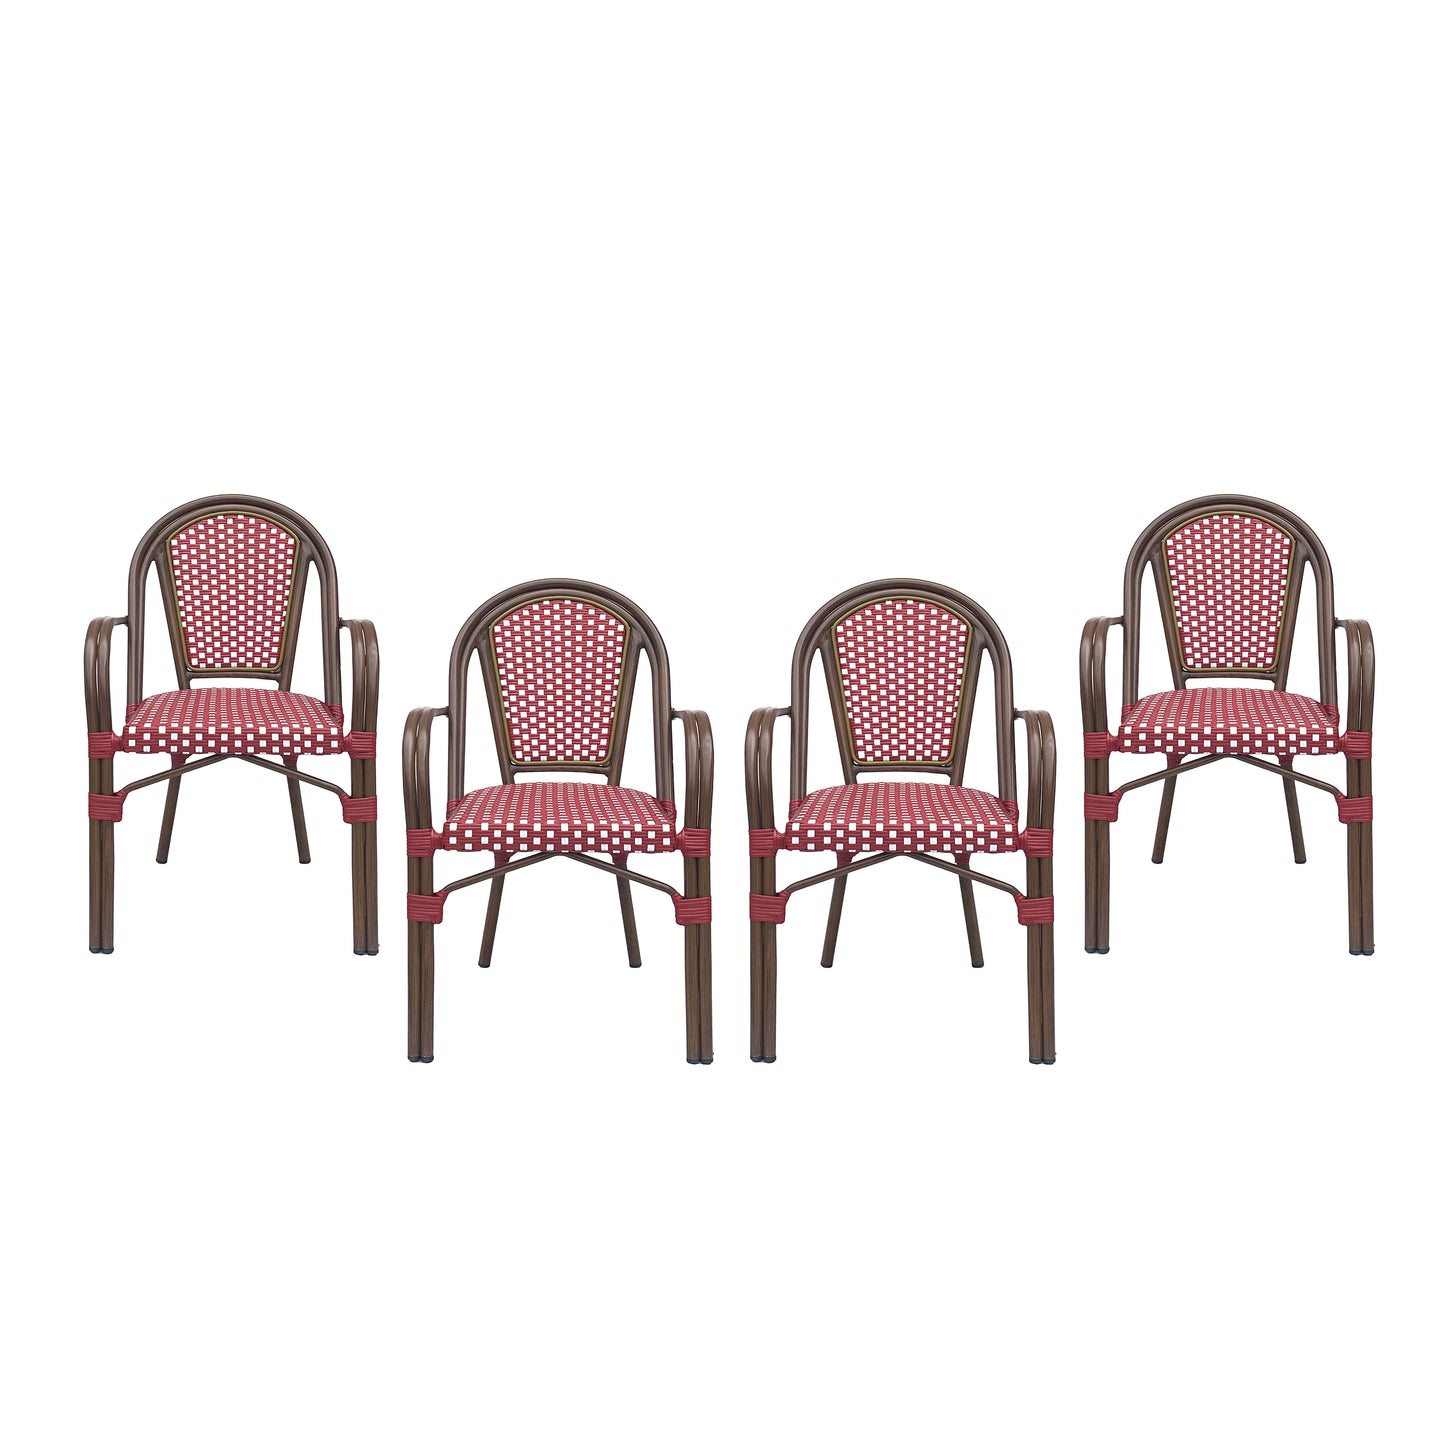 Symonds Outdoor French Bistro Chairs, Set of 4